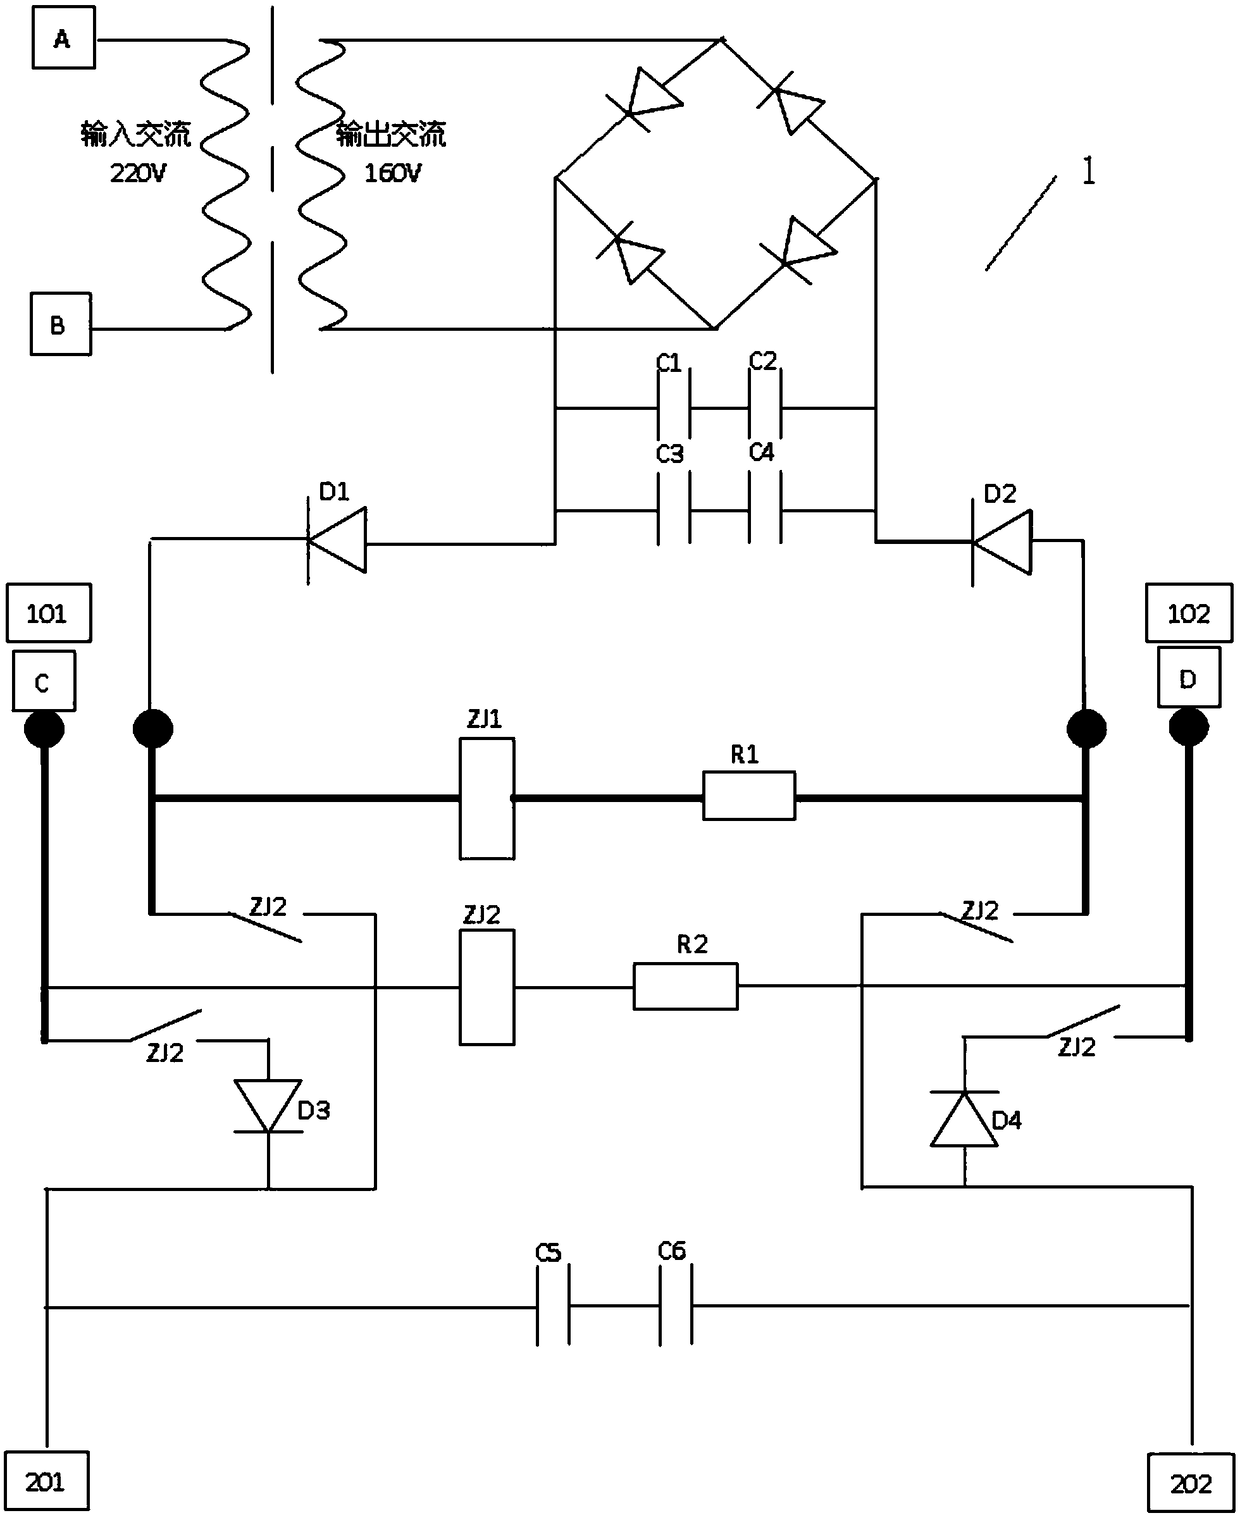 Intelligent controller for preventing switch trip and coil burnout